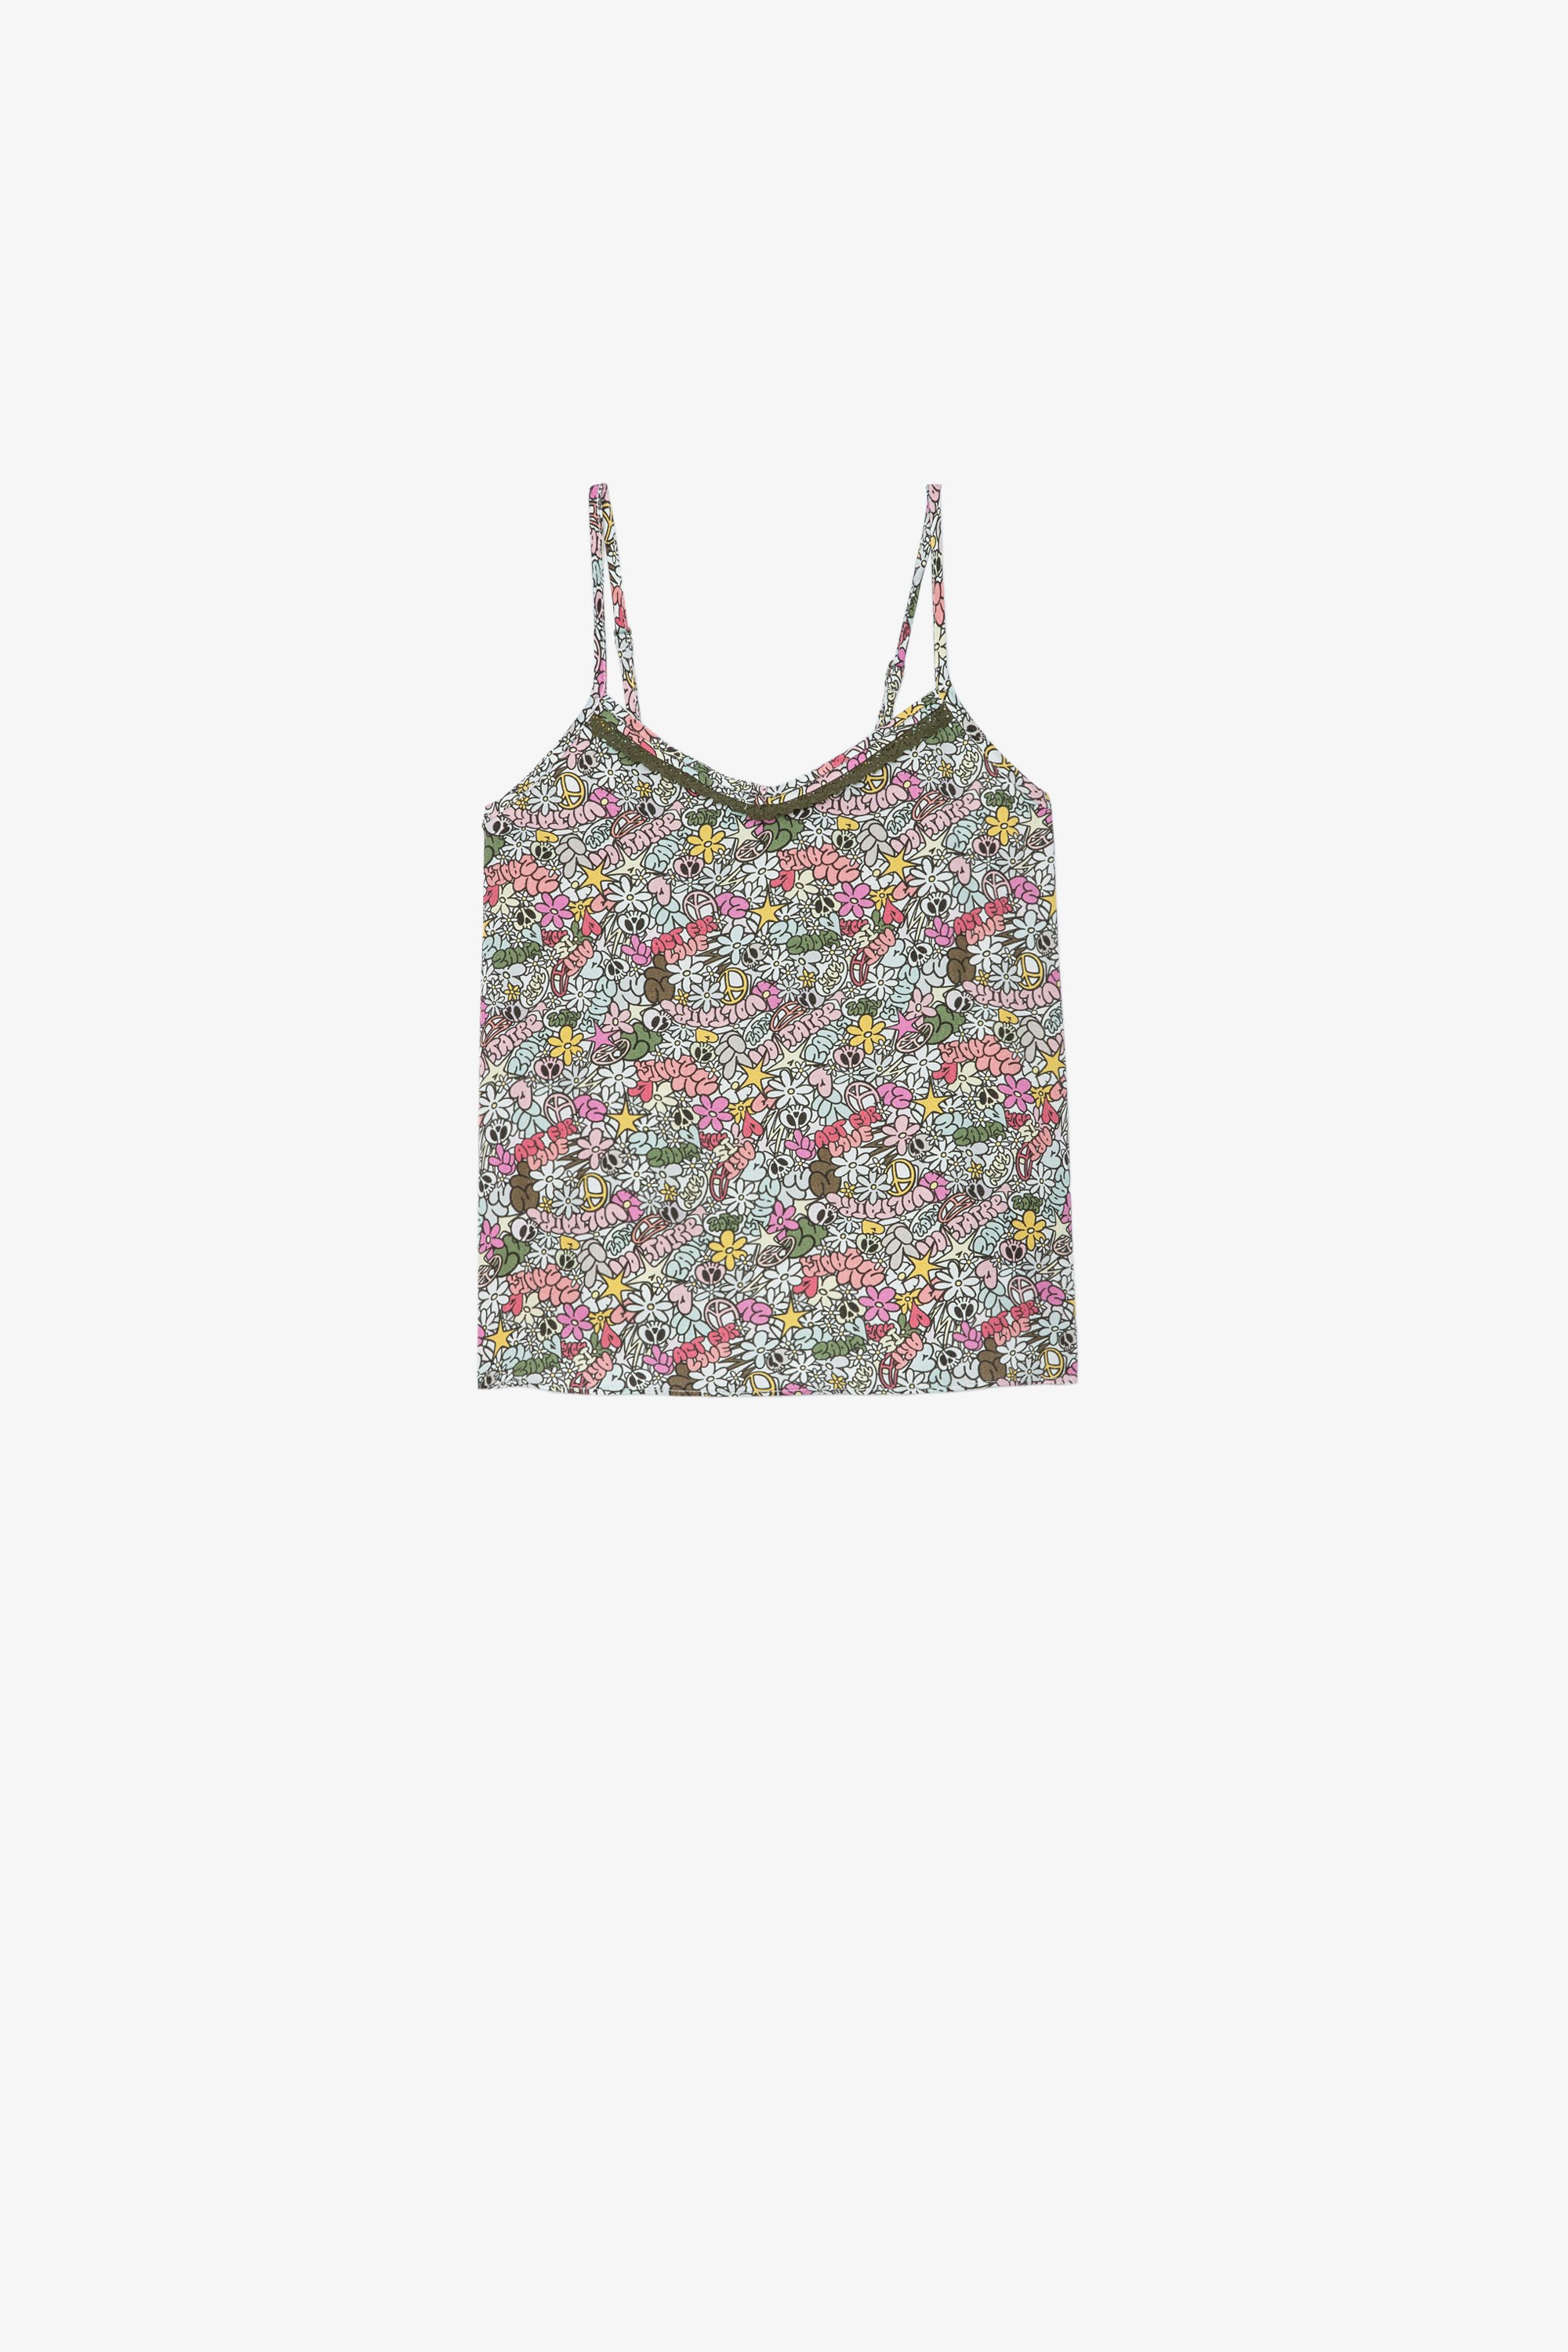 Cam Kids’ Camisole Kids' camisole with spaghetti straps and featuring a Core Cho print